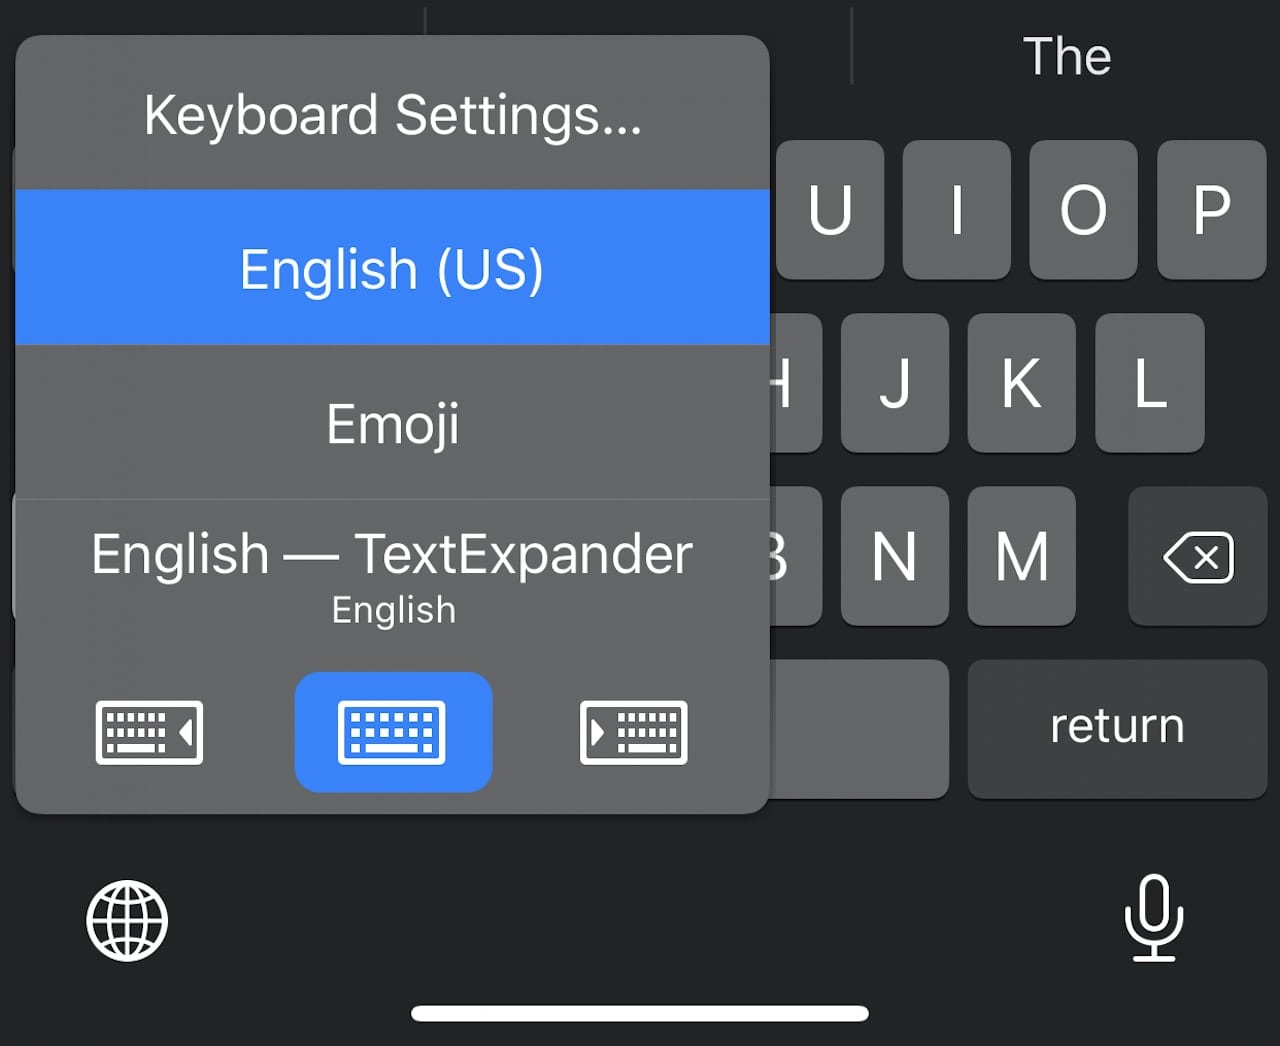 The popup menu for changing keyboards or accessing Keyboard Settings quickly